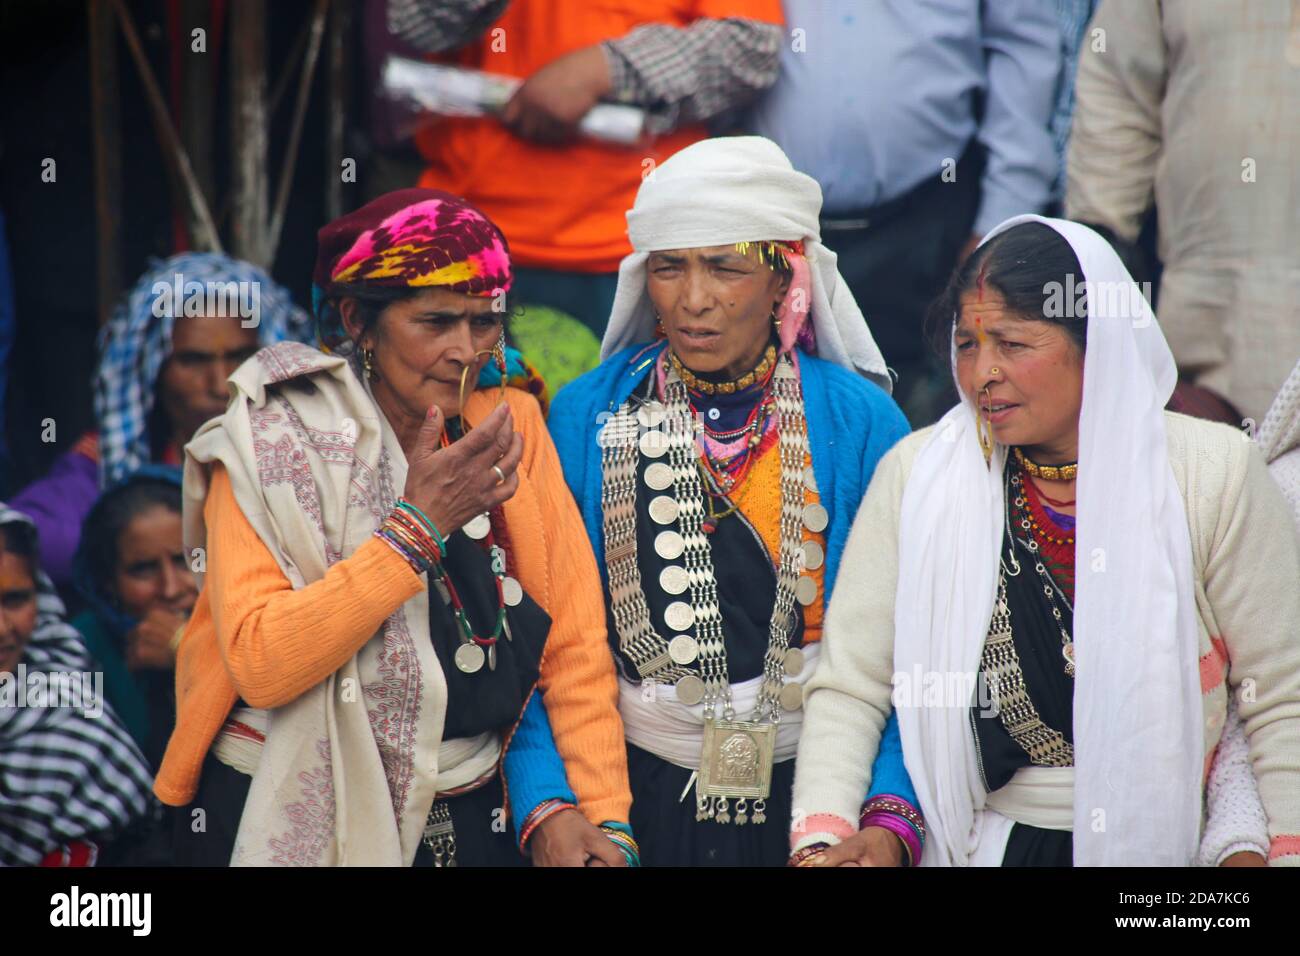 mythologies of the uttrakhand Tribes – Indigenous Peoples Literature